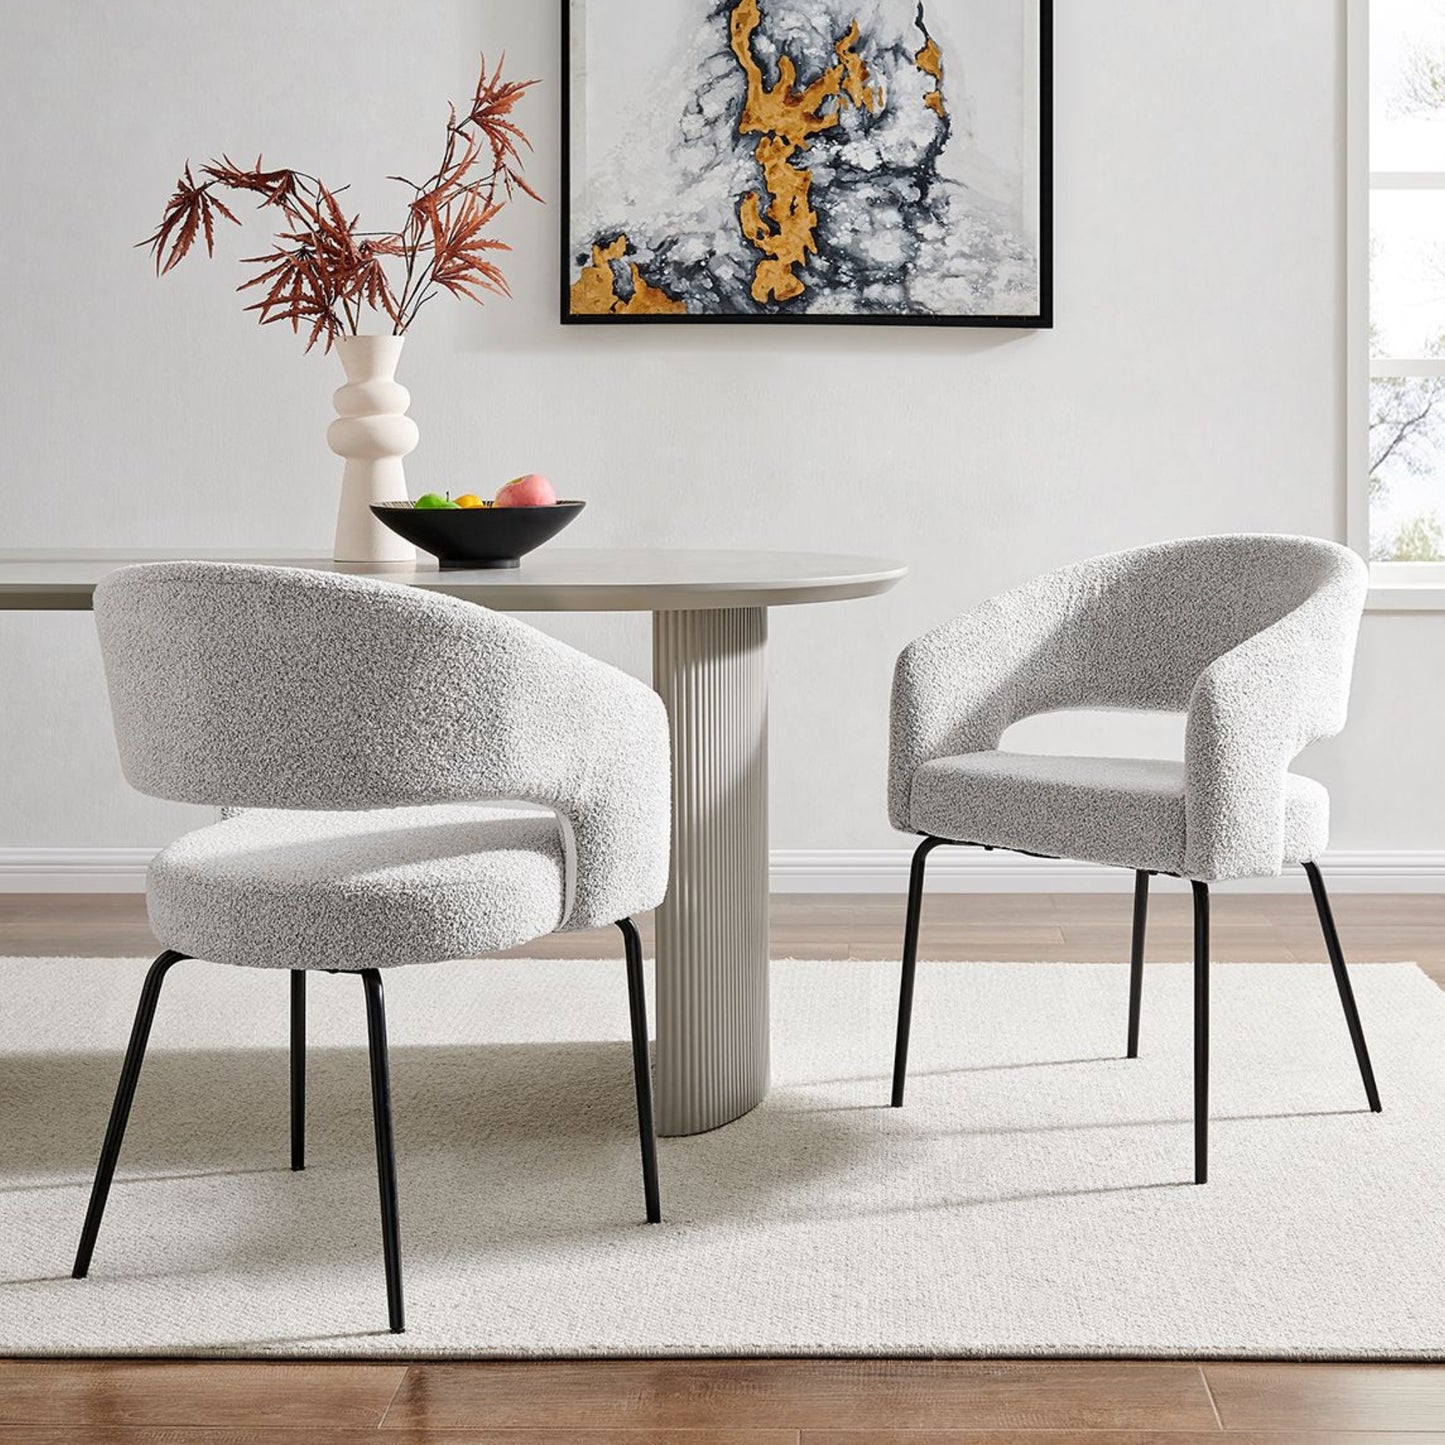 Light Grey Boucle Dining Chair with Black Legs